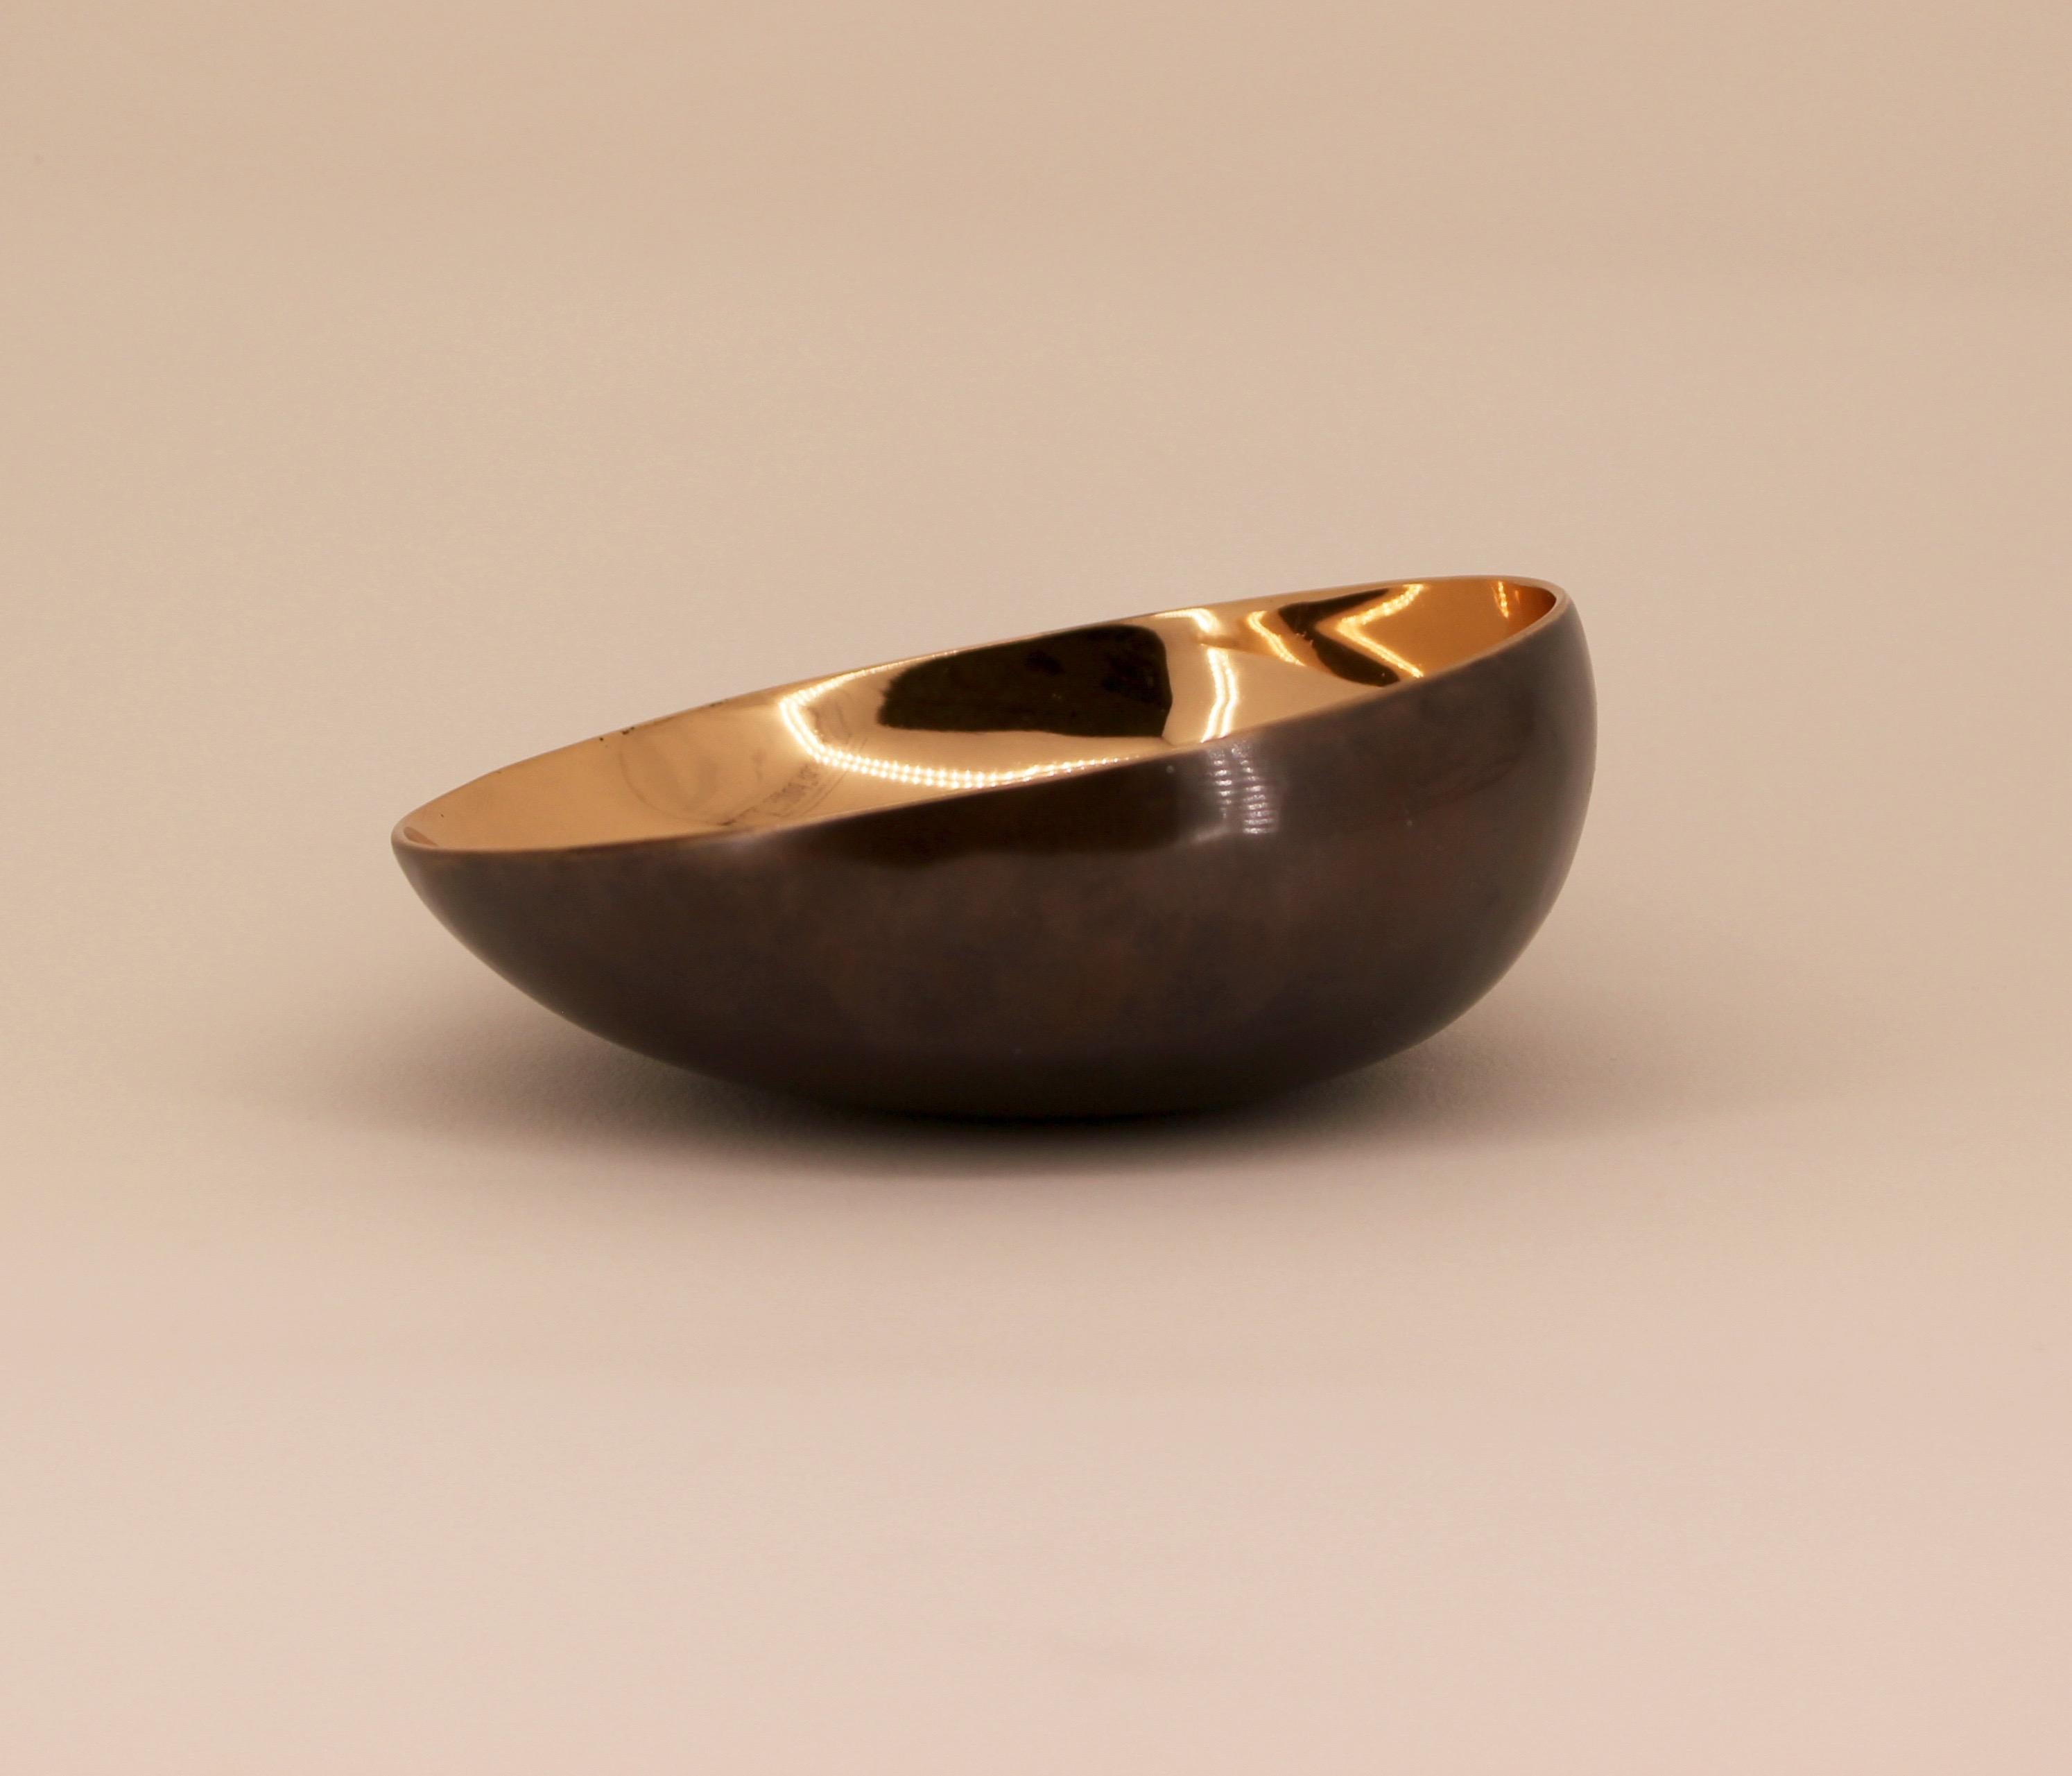 Handmade Cast Bronze with Dark Patina Decorative Indian Bowl, Vide-Poche In New Condition For Sale In London, GB